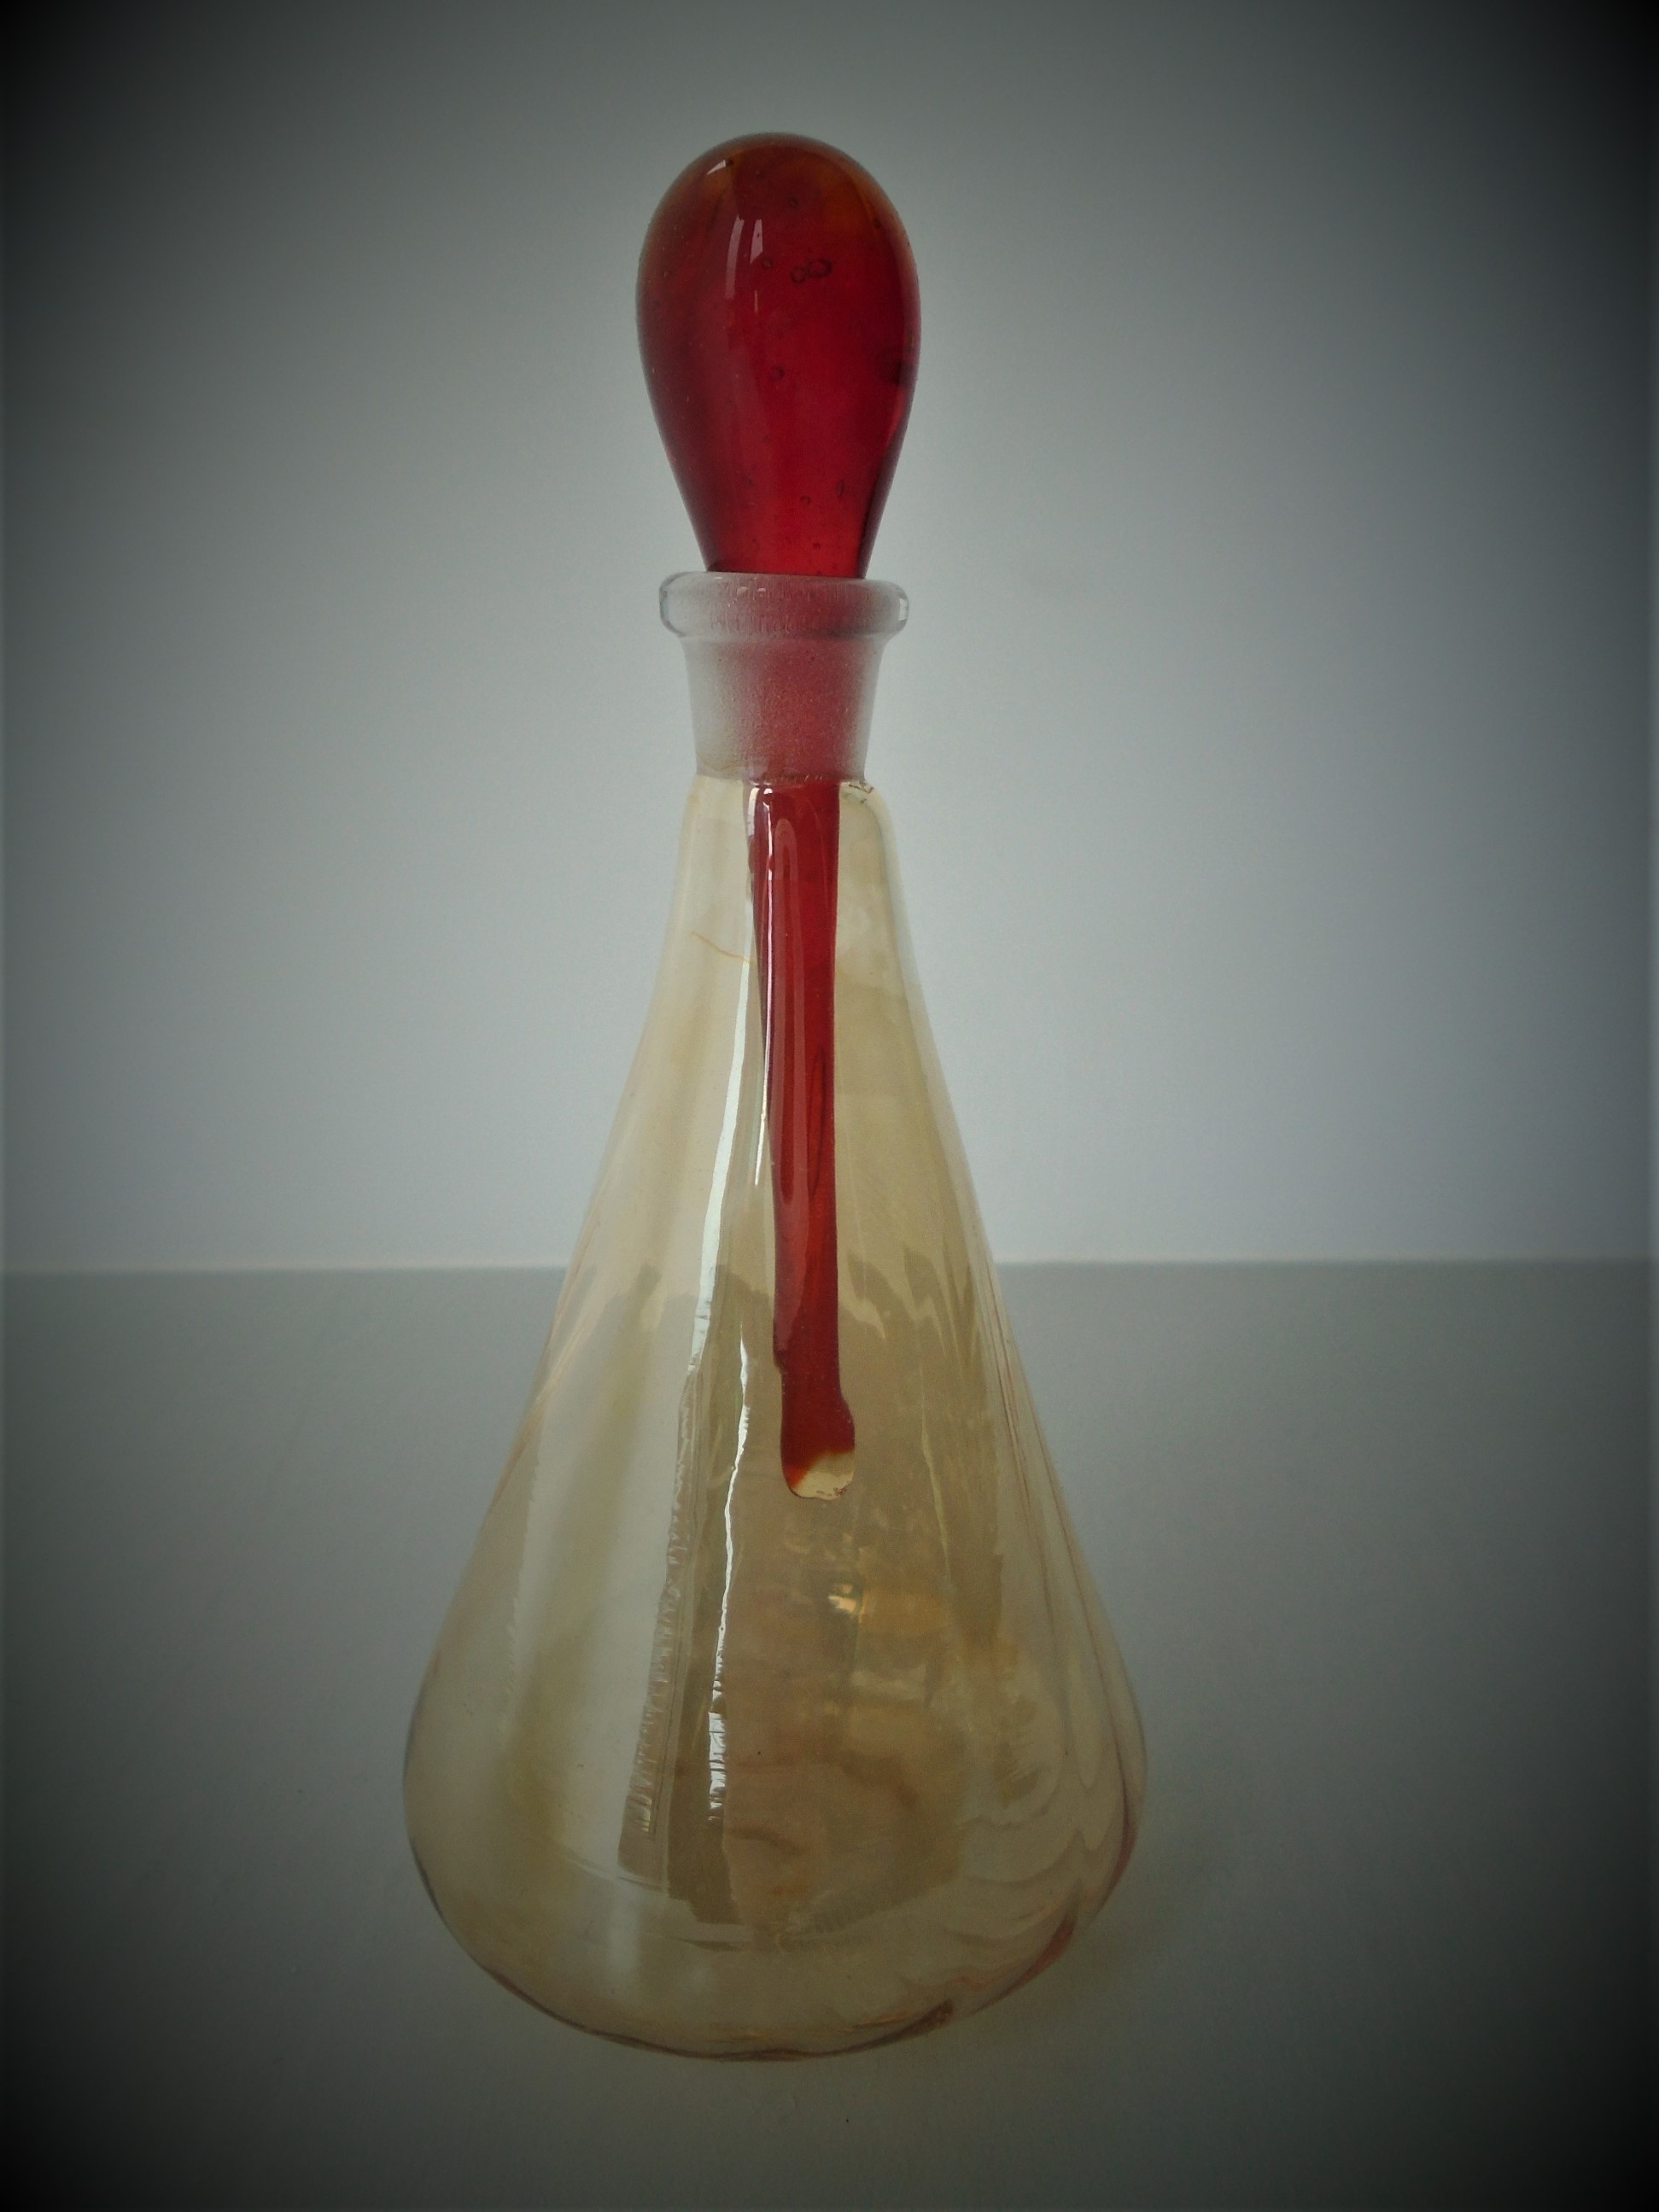 Offered for sale is a PRETTY CONICAL SHAPED GLASS PERFUME BOTTLE.